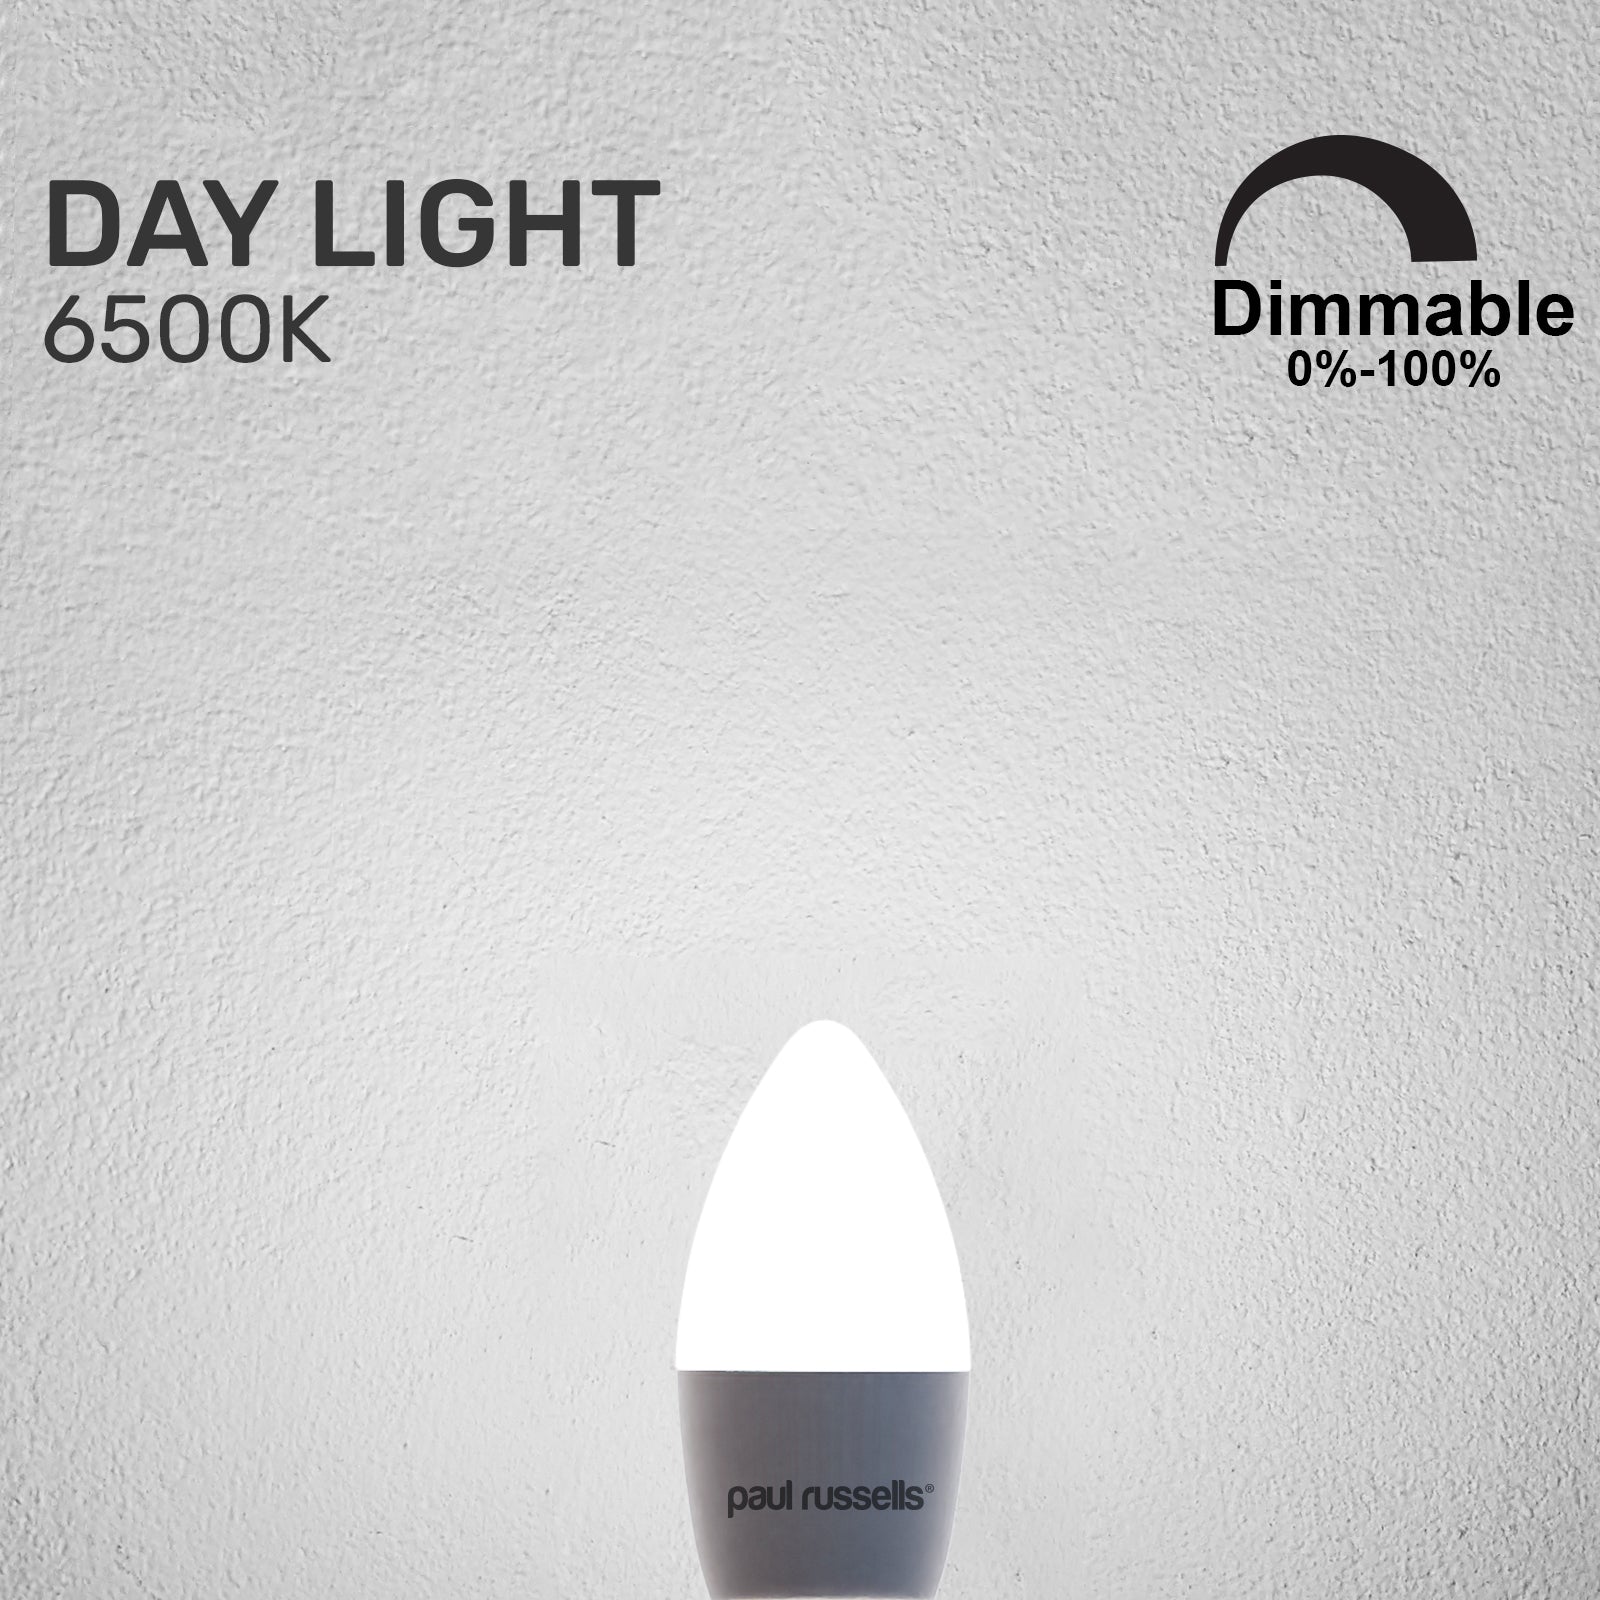 LED Dimmable Candle 5.5W (40w), ES/E27, 470 Lumens, Day Light(6500K), 240V